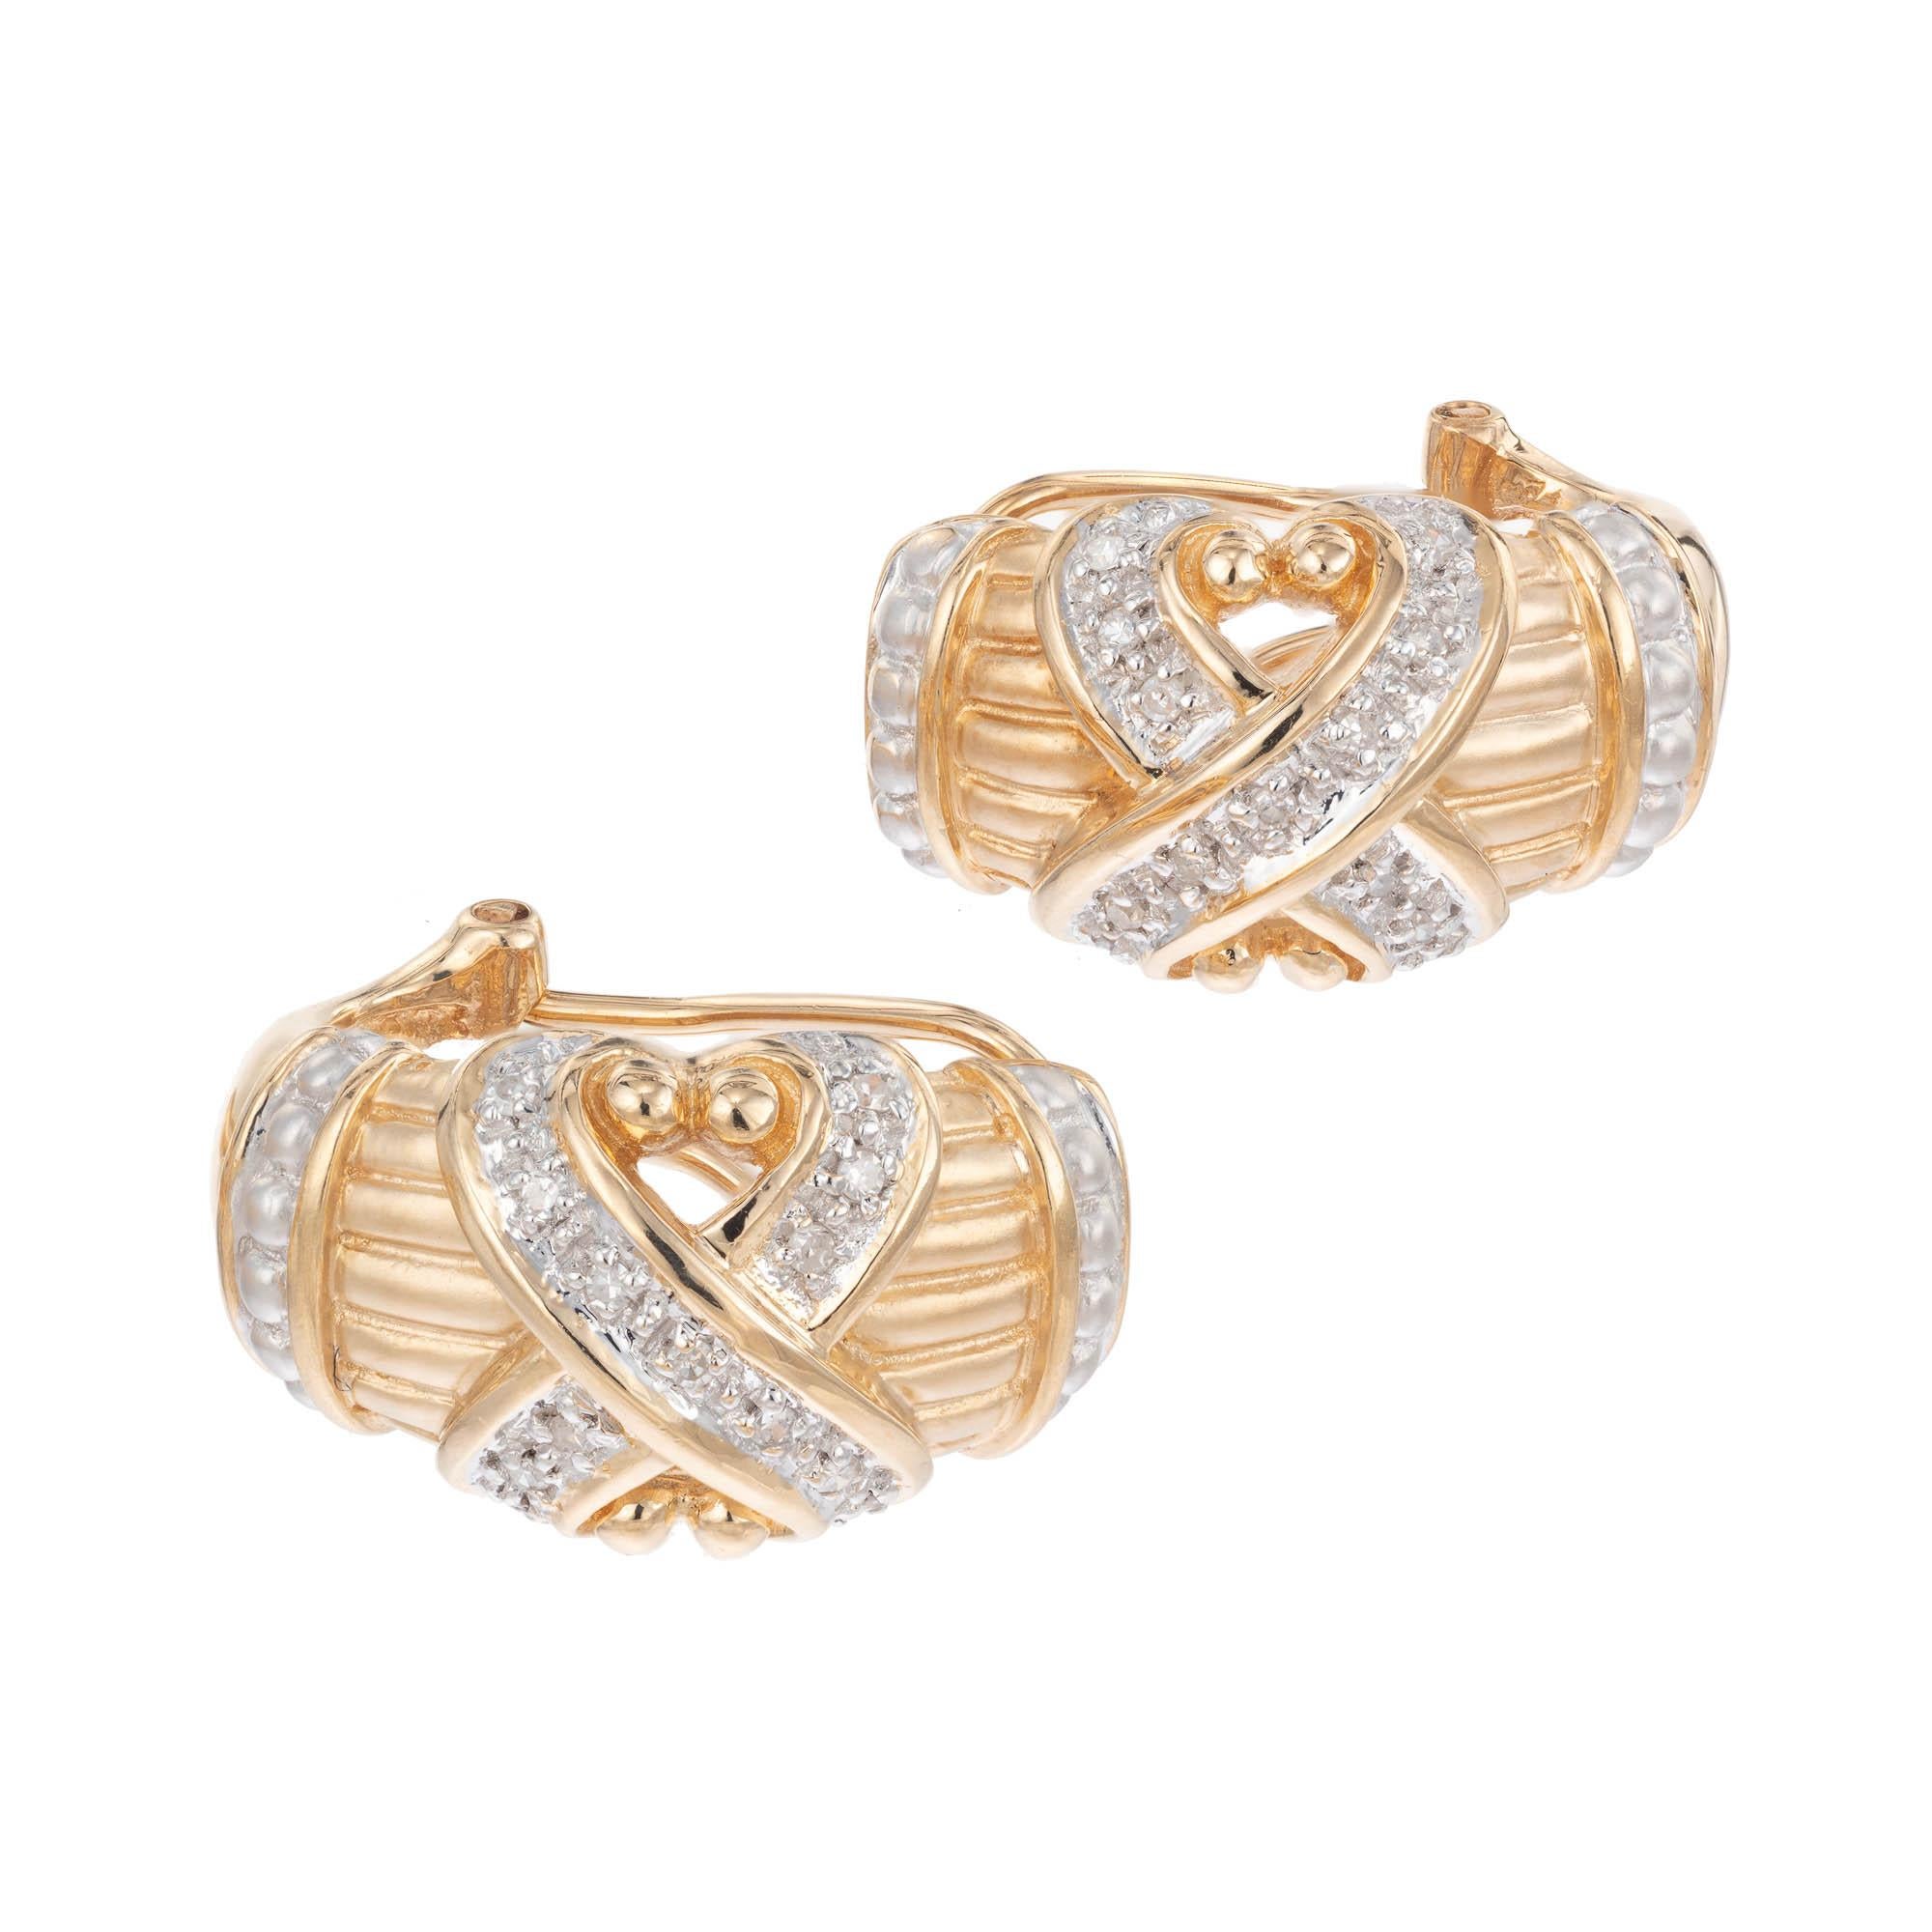 Diamond X design 14k yellow and white gold clip post earrings.

26 round single cut H-I SI-I diamonds, Approximate .20 carats 
14k Yellow Gold
14k White Gold
Stamped: 14k 585
Top to Bottom: 20.9mm
Width: 12.2mm 
Depth or Thickness: 1.5mm
